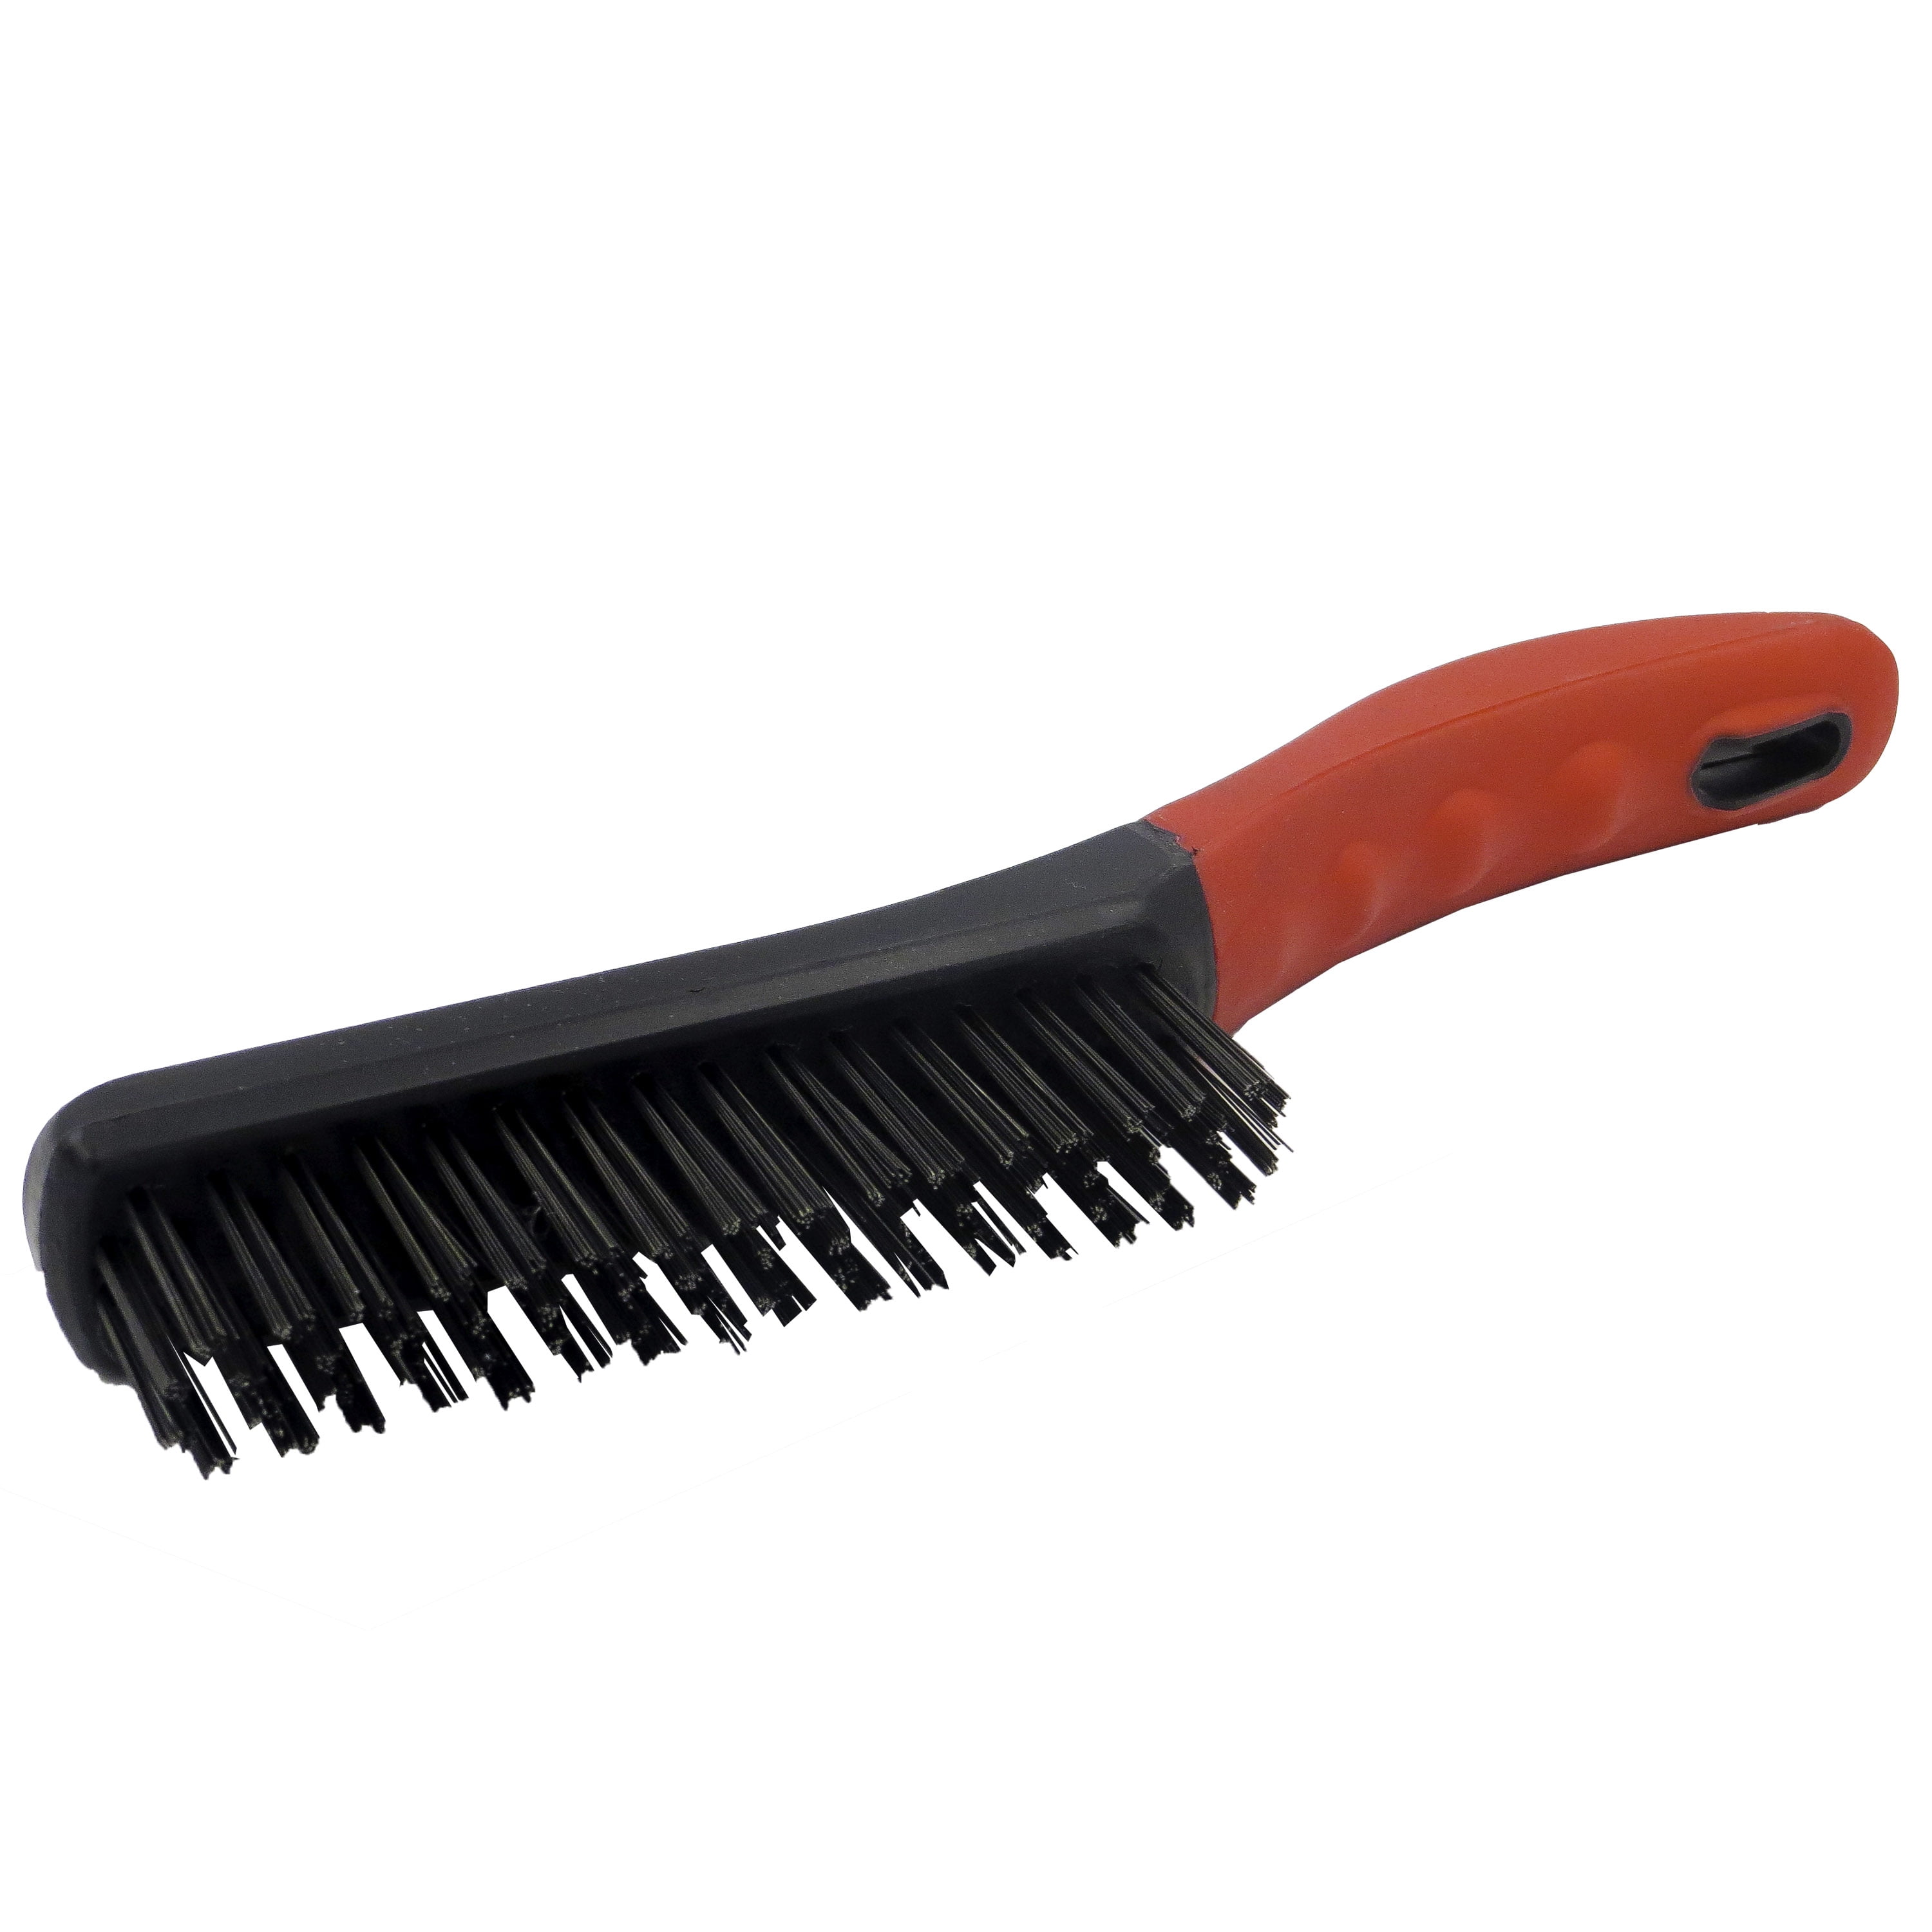 Marko, Inc. - Janitorial Supplies Online > Steel Wire Heavy Duty Scrubbing  and Stripping Brushes > 16 Steel Wire Rotary Aggressive Scrub Brush